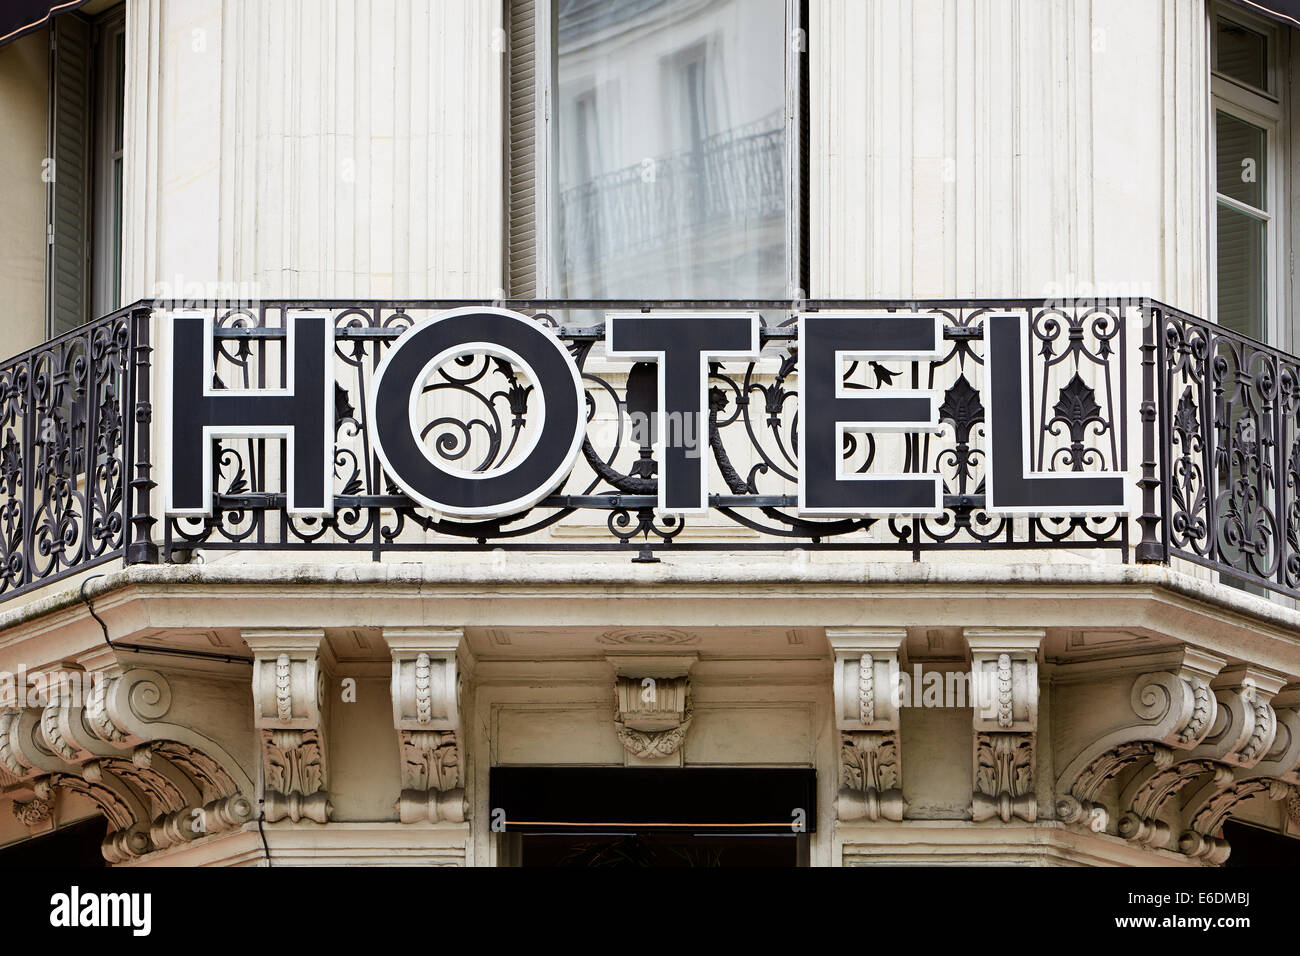 Hotel sign on balcony in Europe Stock Photo